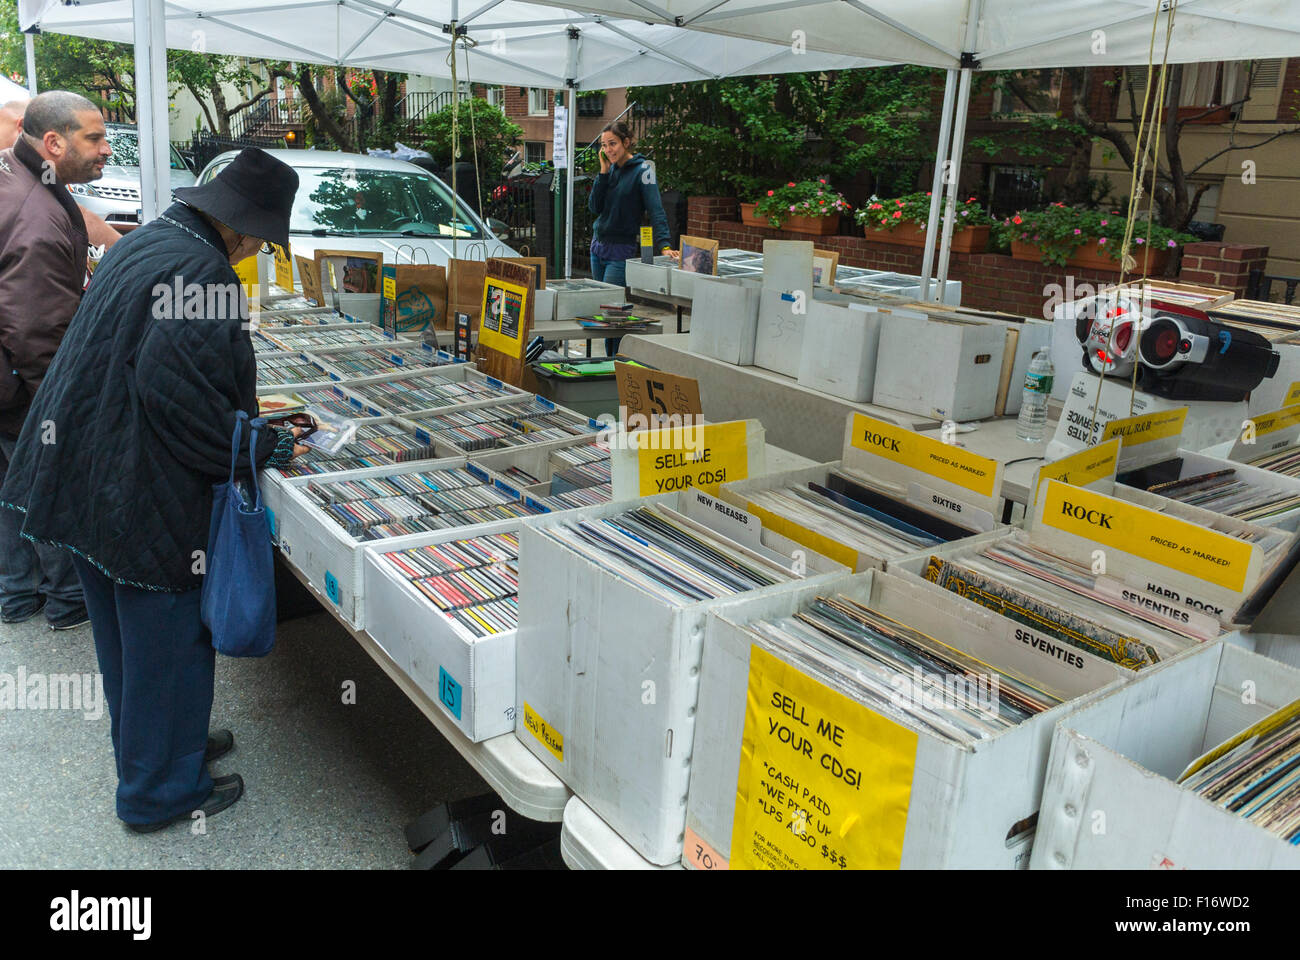 New York City, USA, People Shopping, Record Store, Vinyl Vintage Records on Display in Boxes at Chelsea Street Flea Market, Street Vendor, browsing vintage shop, Record Store usa Stock Photo